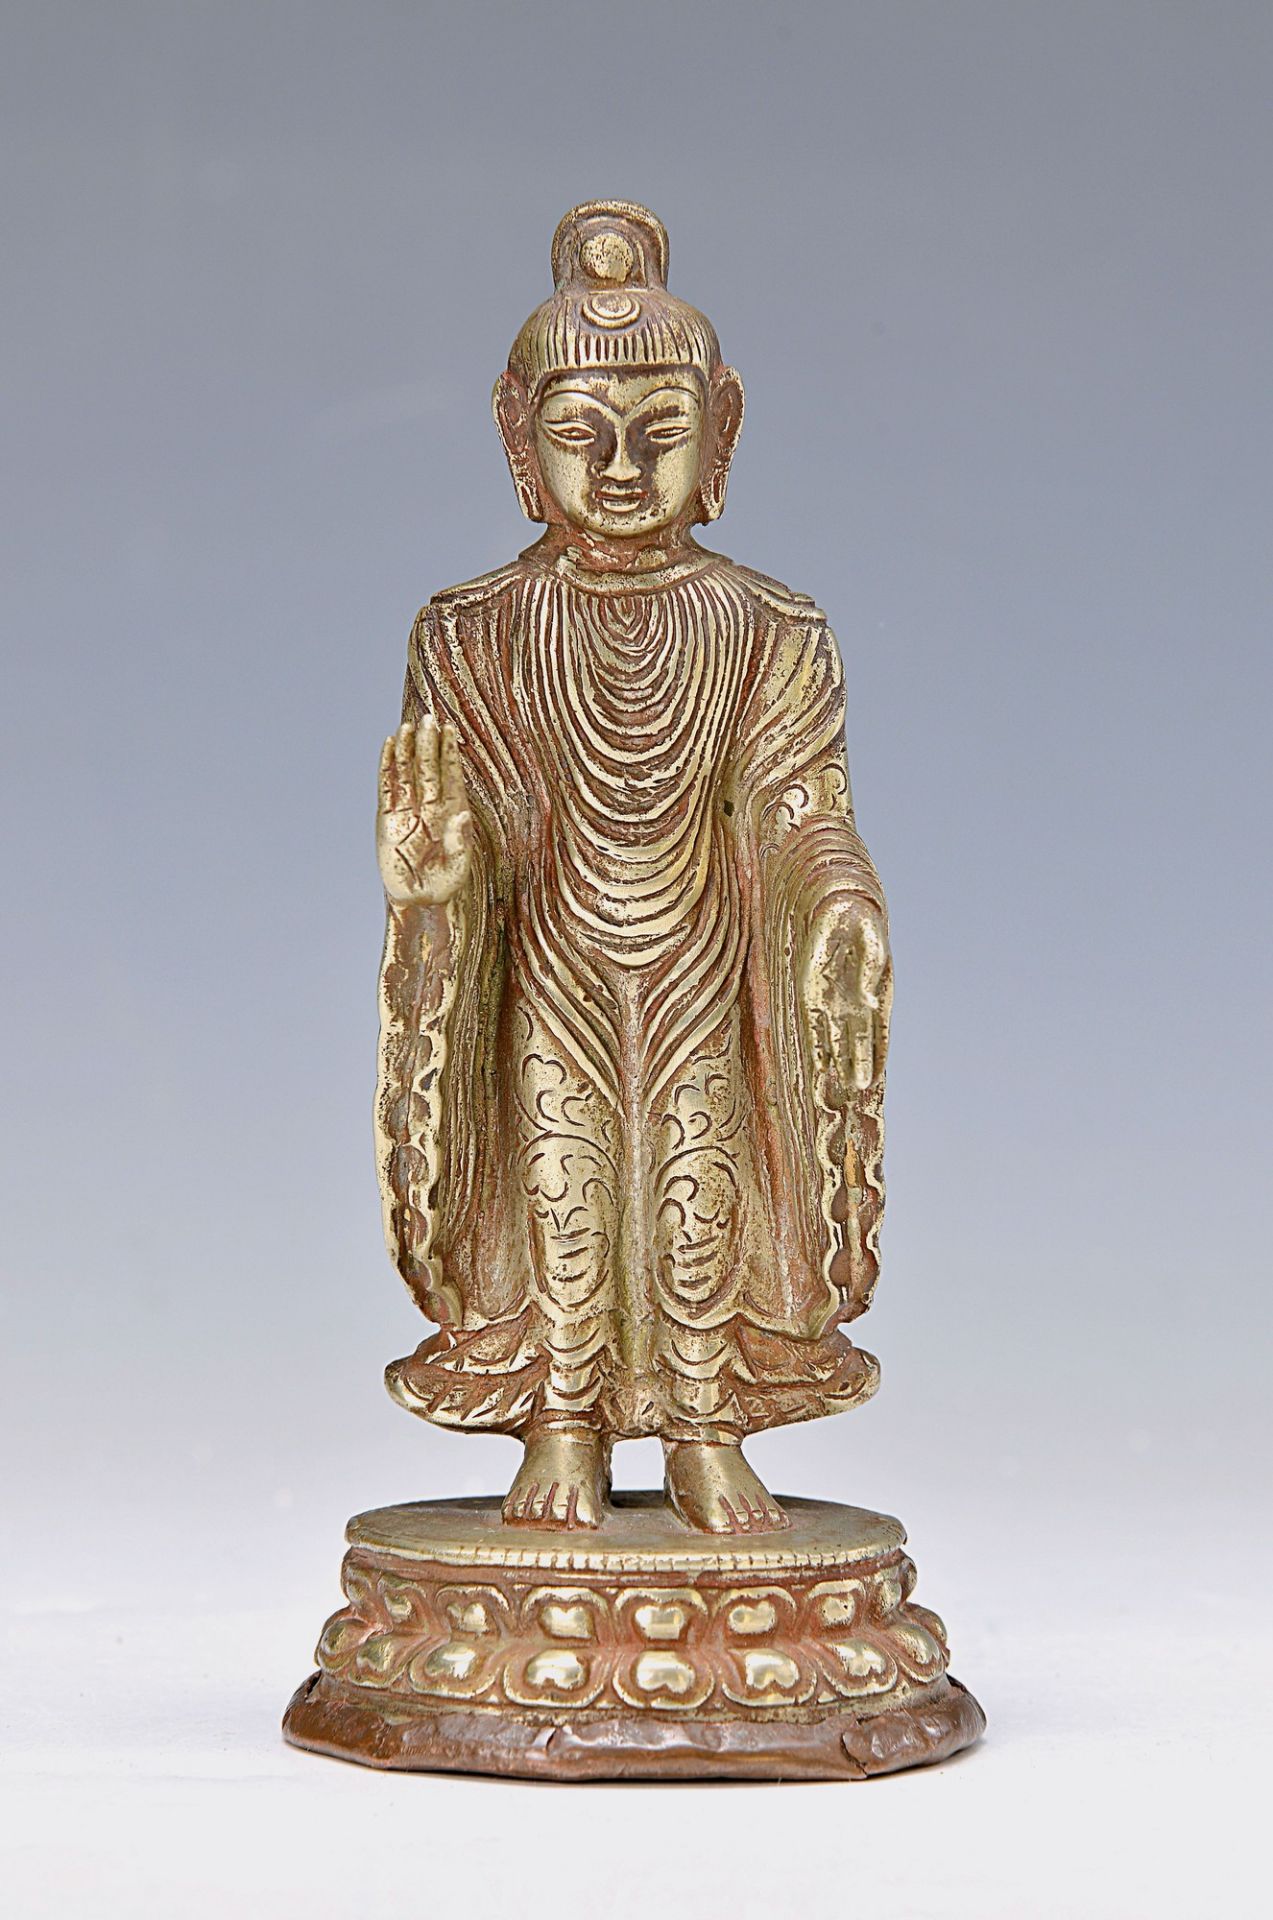 Standing Buddha, China, around 1820, Bronze, double lotus pedestal, traces of age, H. approx. 16.3